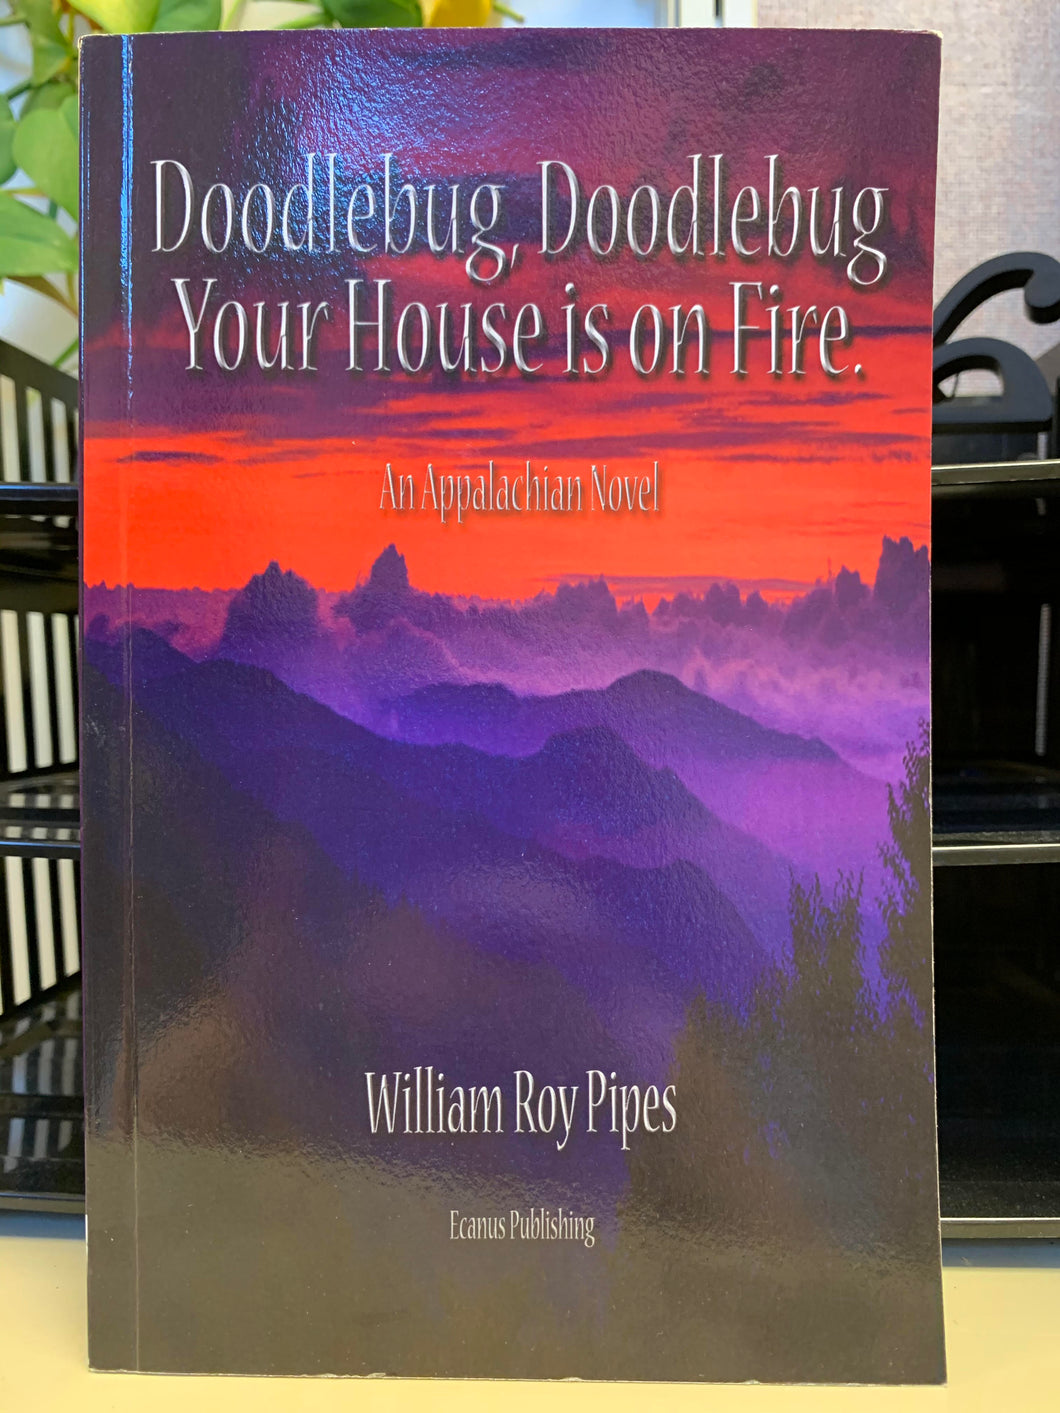 Doodlebug, Doodlebug, Your House is on Fire by William Roy Pipes